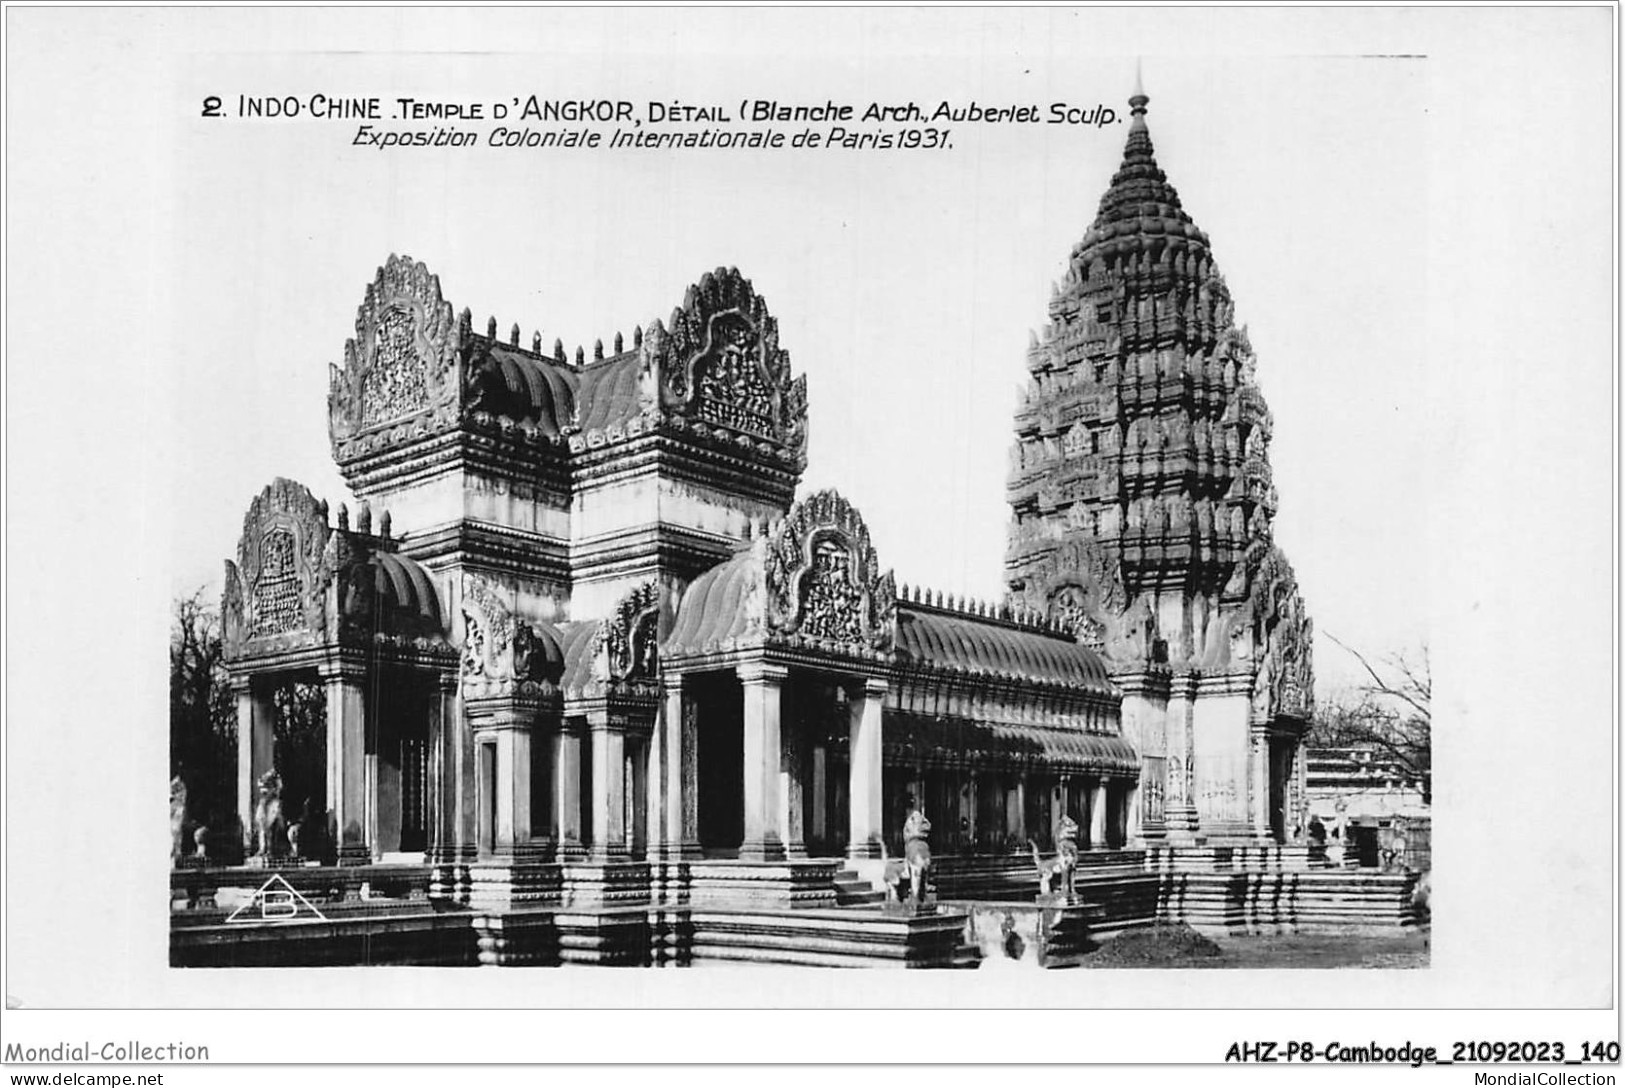 AHZP8-CAMBODGE-0753 - EXPOSITION COLONIALE INTERNATIONALE - PARIS 1931 - INDO-CHINE - TEMPLE D'ANGKOR - DETAIL - Cambodge